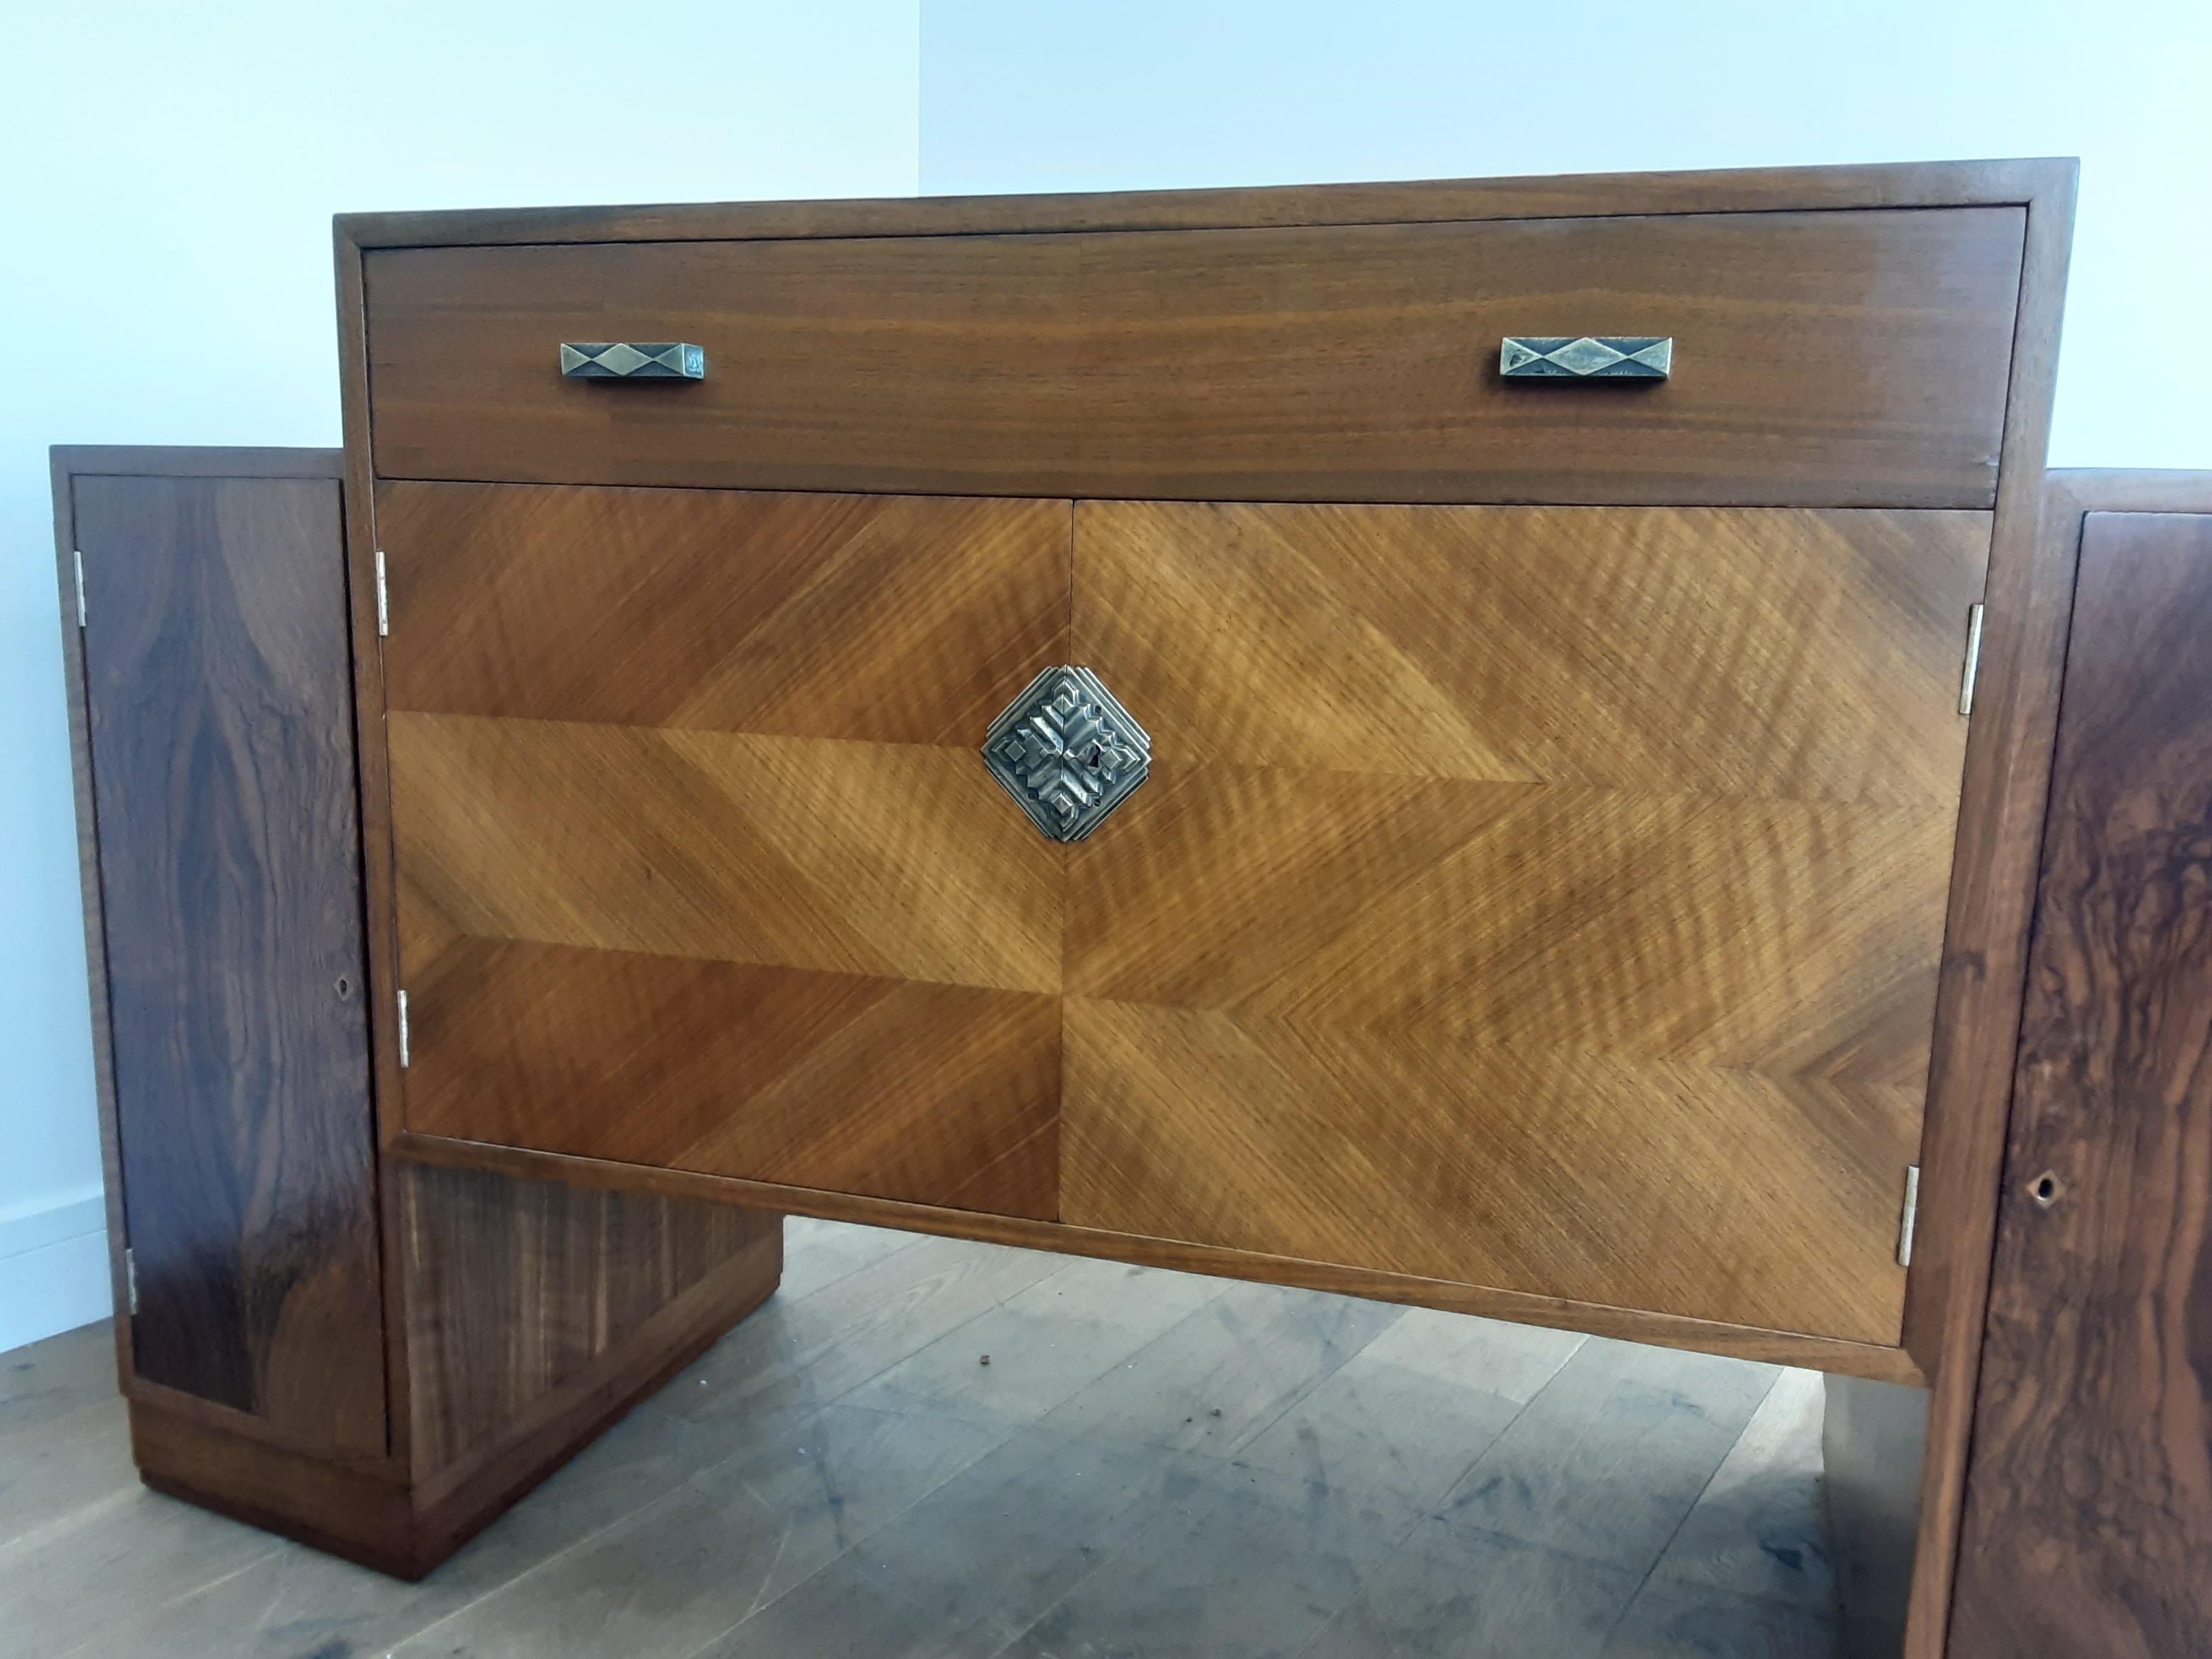 British Art Deco sideboard credenza
beautiful figured walnut side cupboards with single shelf.
The centre section with diamond metal plate and radiating diamond cut walnut veneer. shelved cupboard under single fitted drawer.
A very impressive